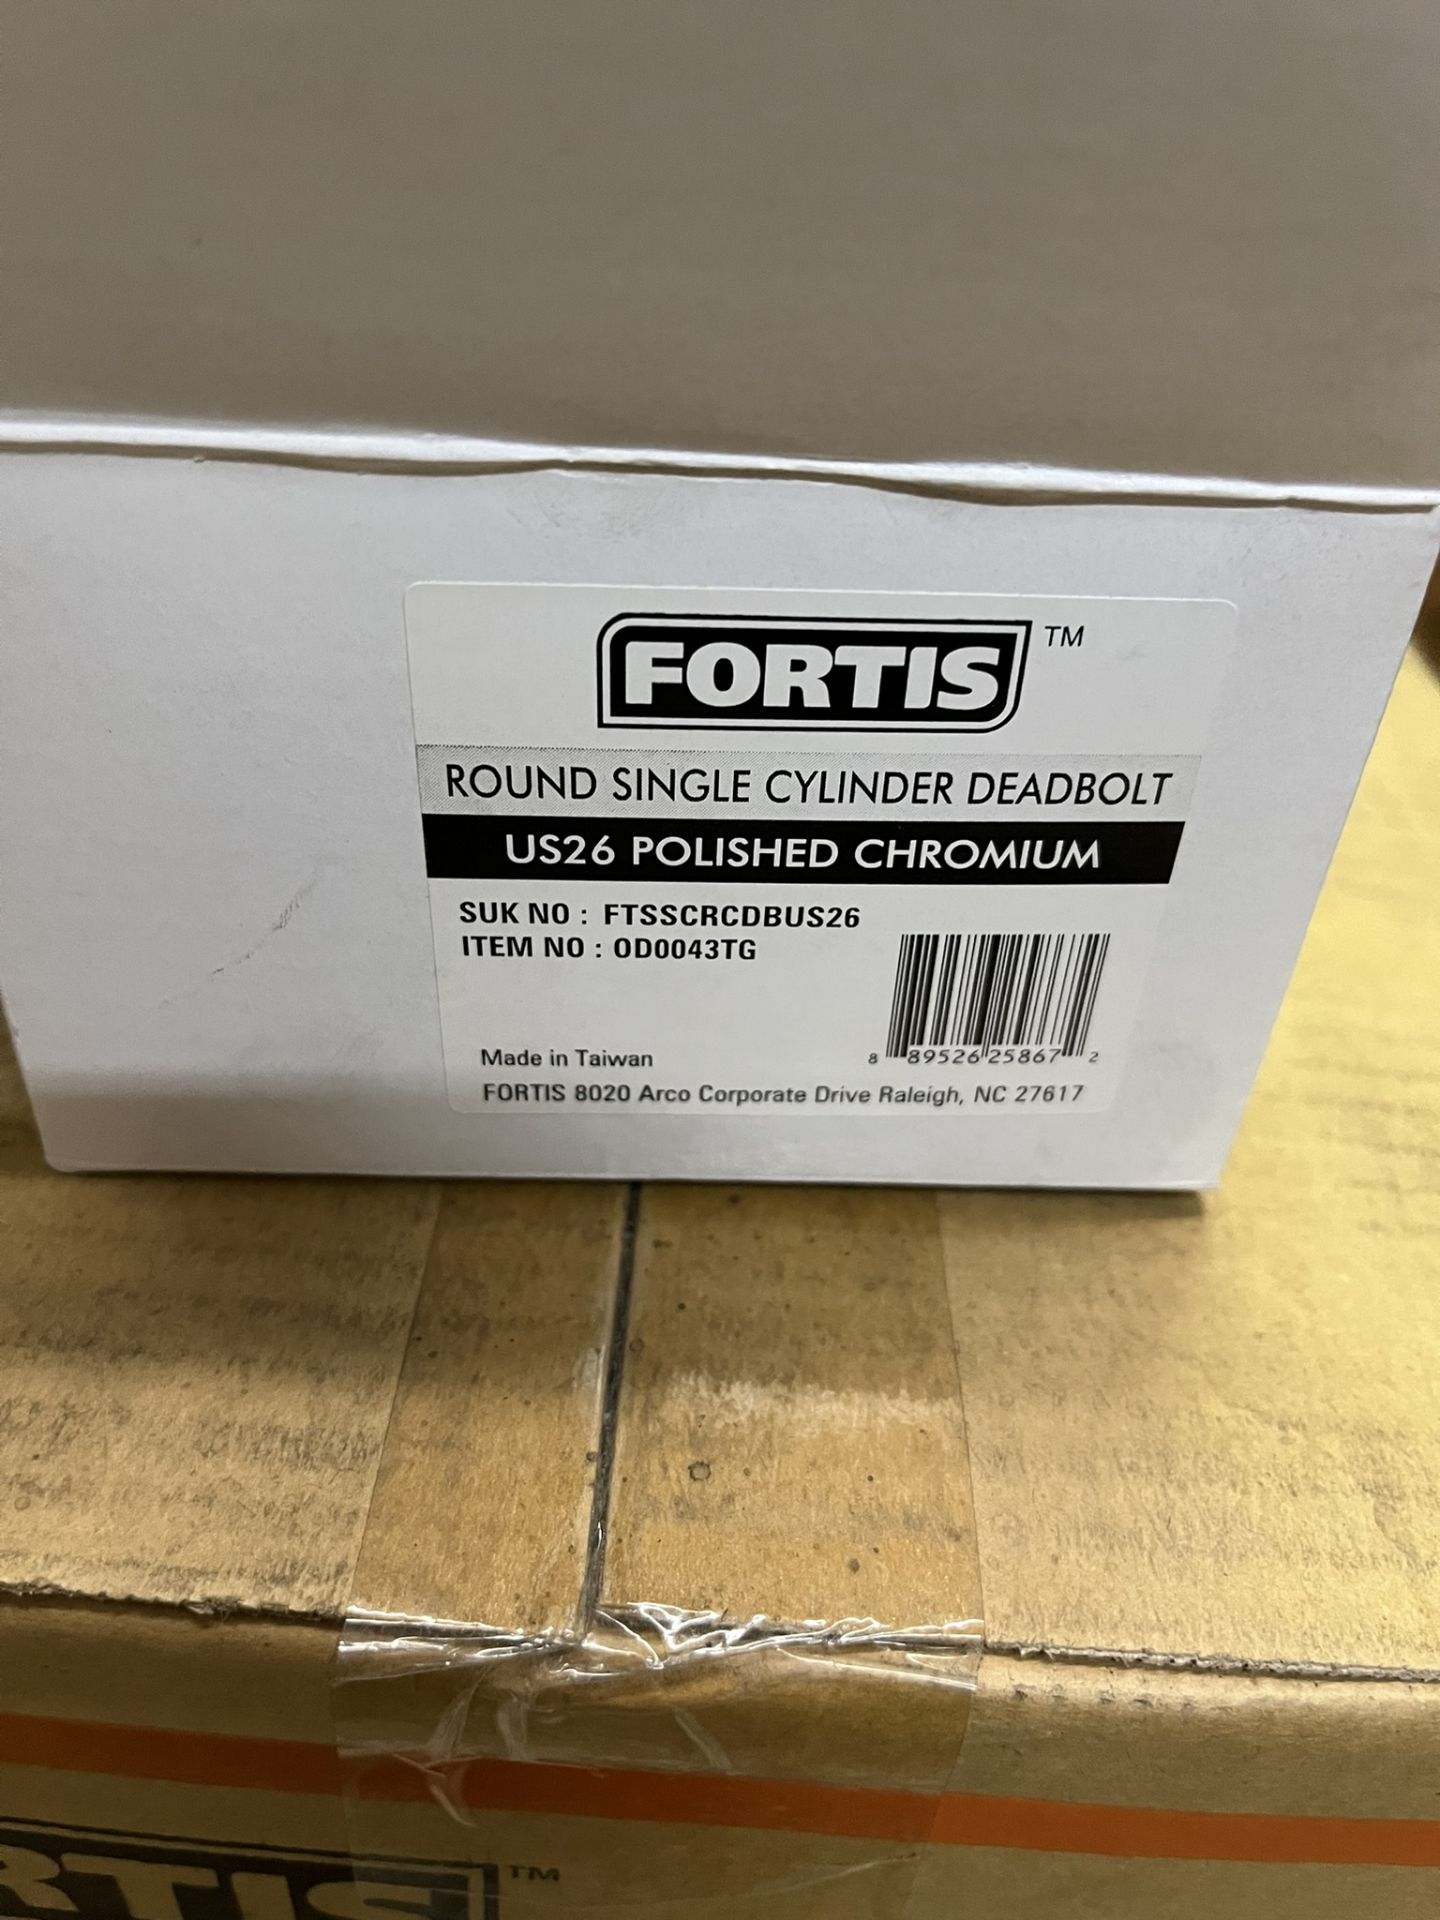 (12) FORTIS ROUND SINGLE CYLINDER DEADBOLTS US26 POLISHED CHROMIUM - Image 2 of 3